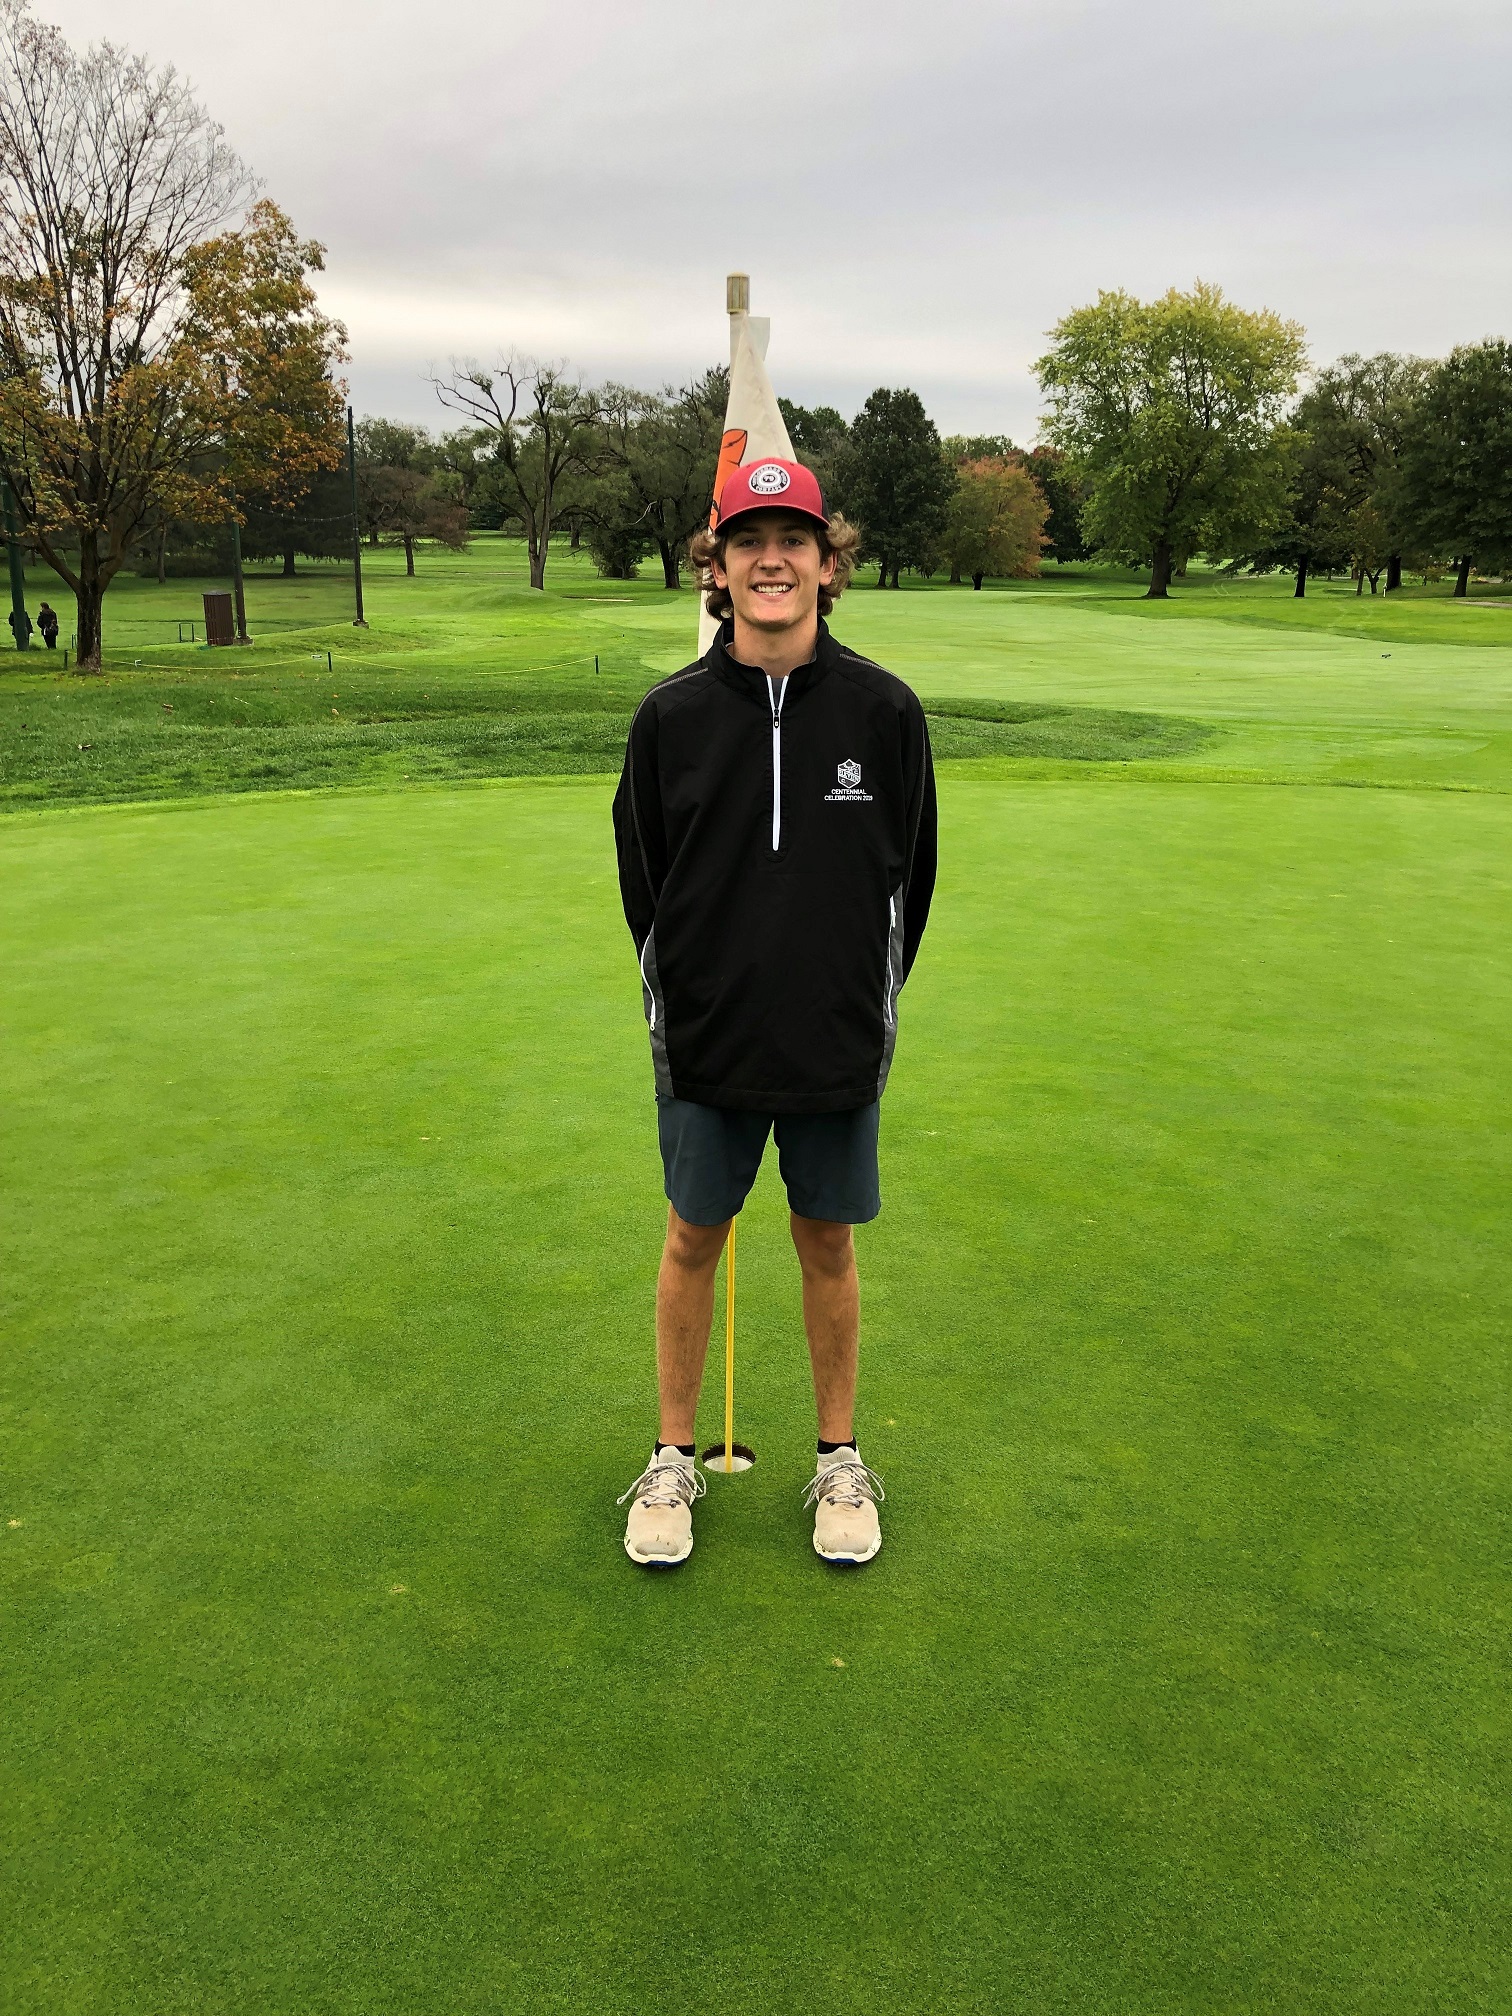 Totsky Excels at Golf Districts_10-05-21